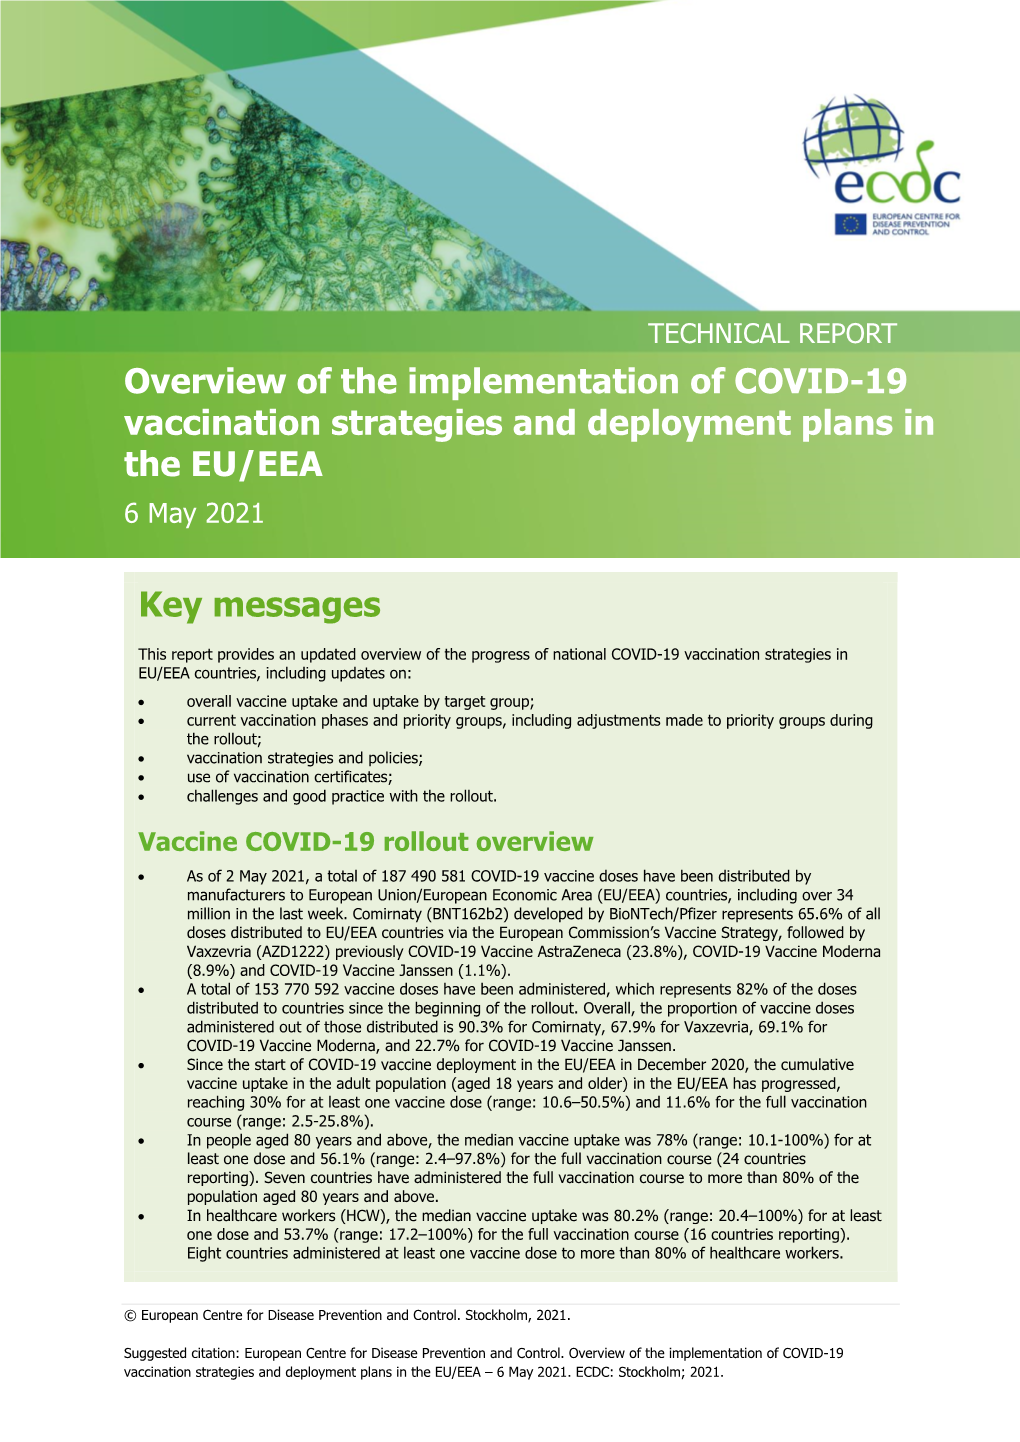 Overview of the Implementation of COVID-19 Vaccination Strategies and Deployment Plans in the EU/EEA